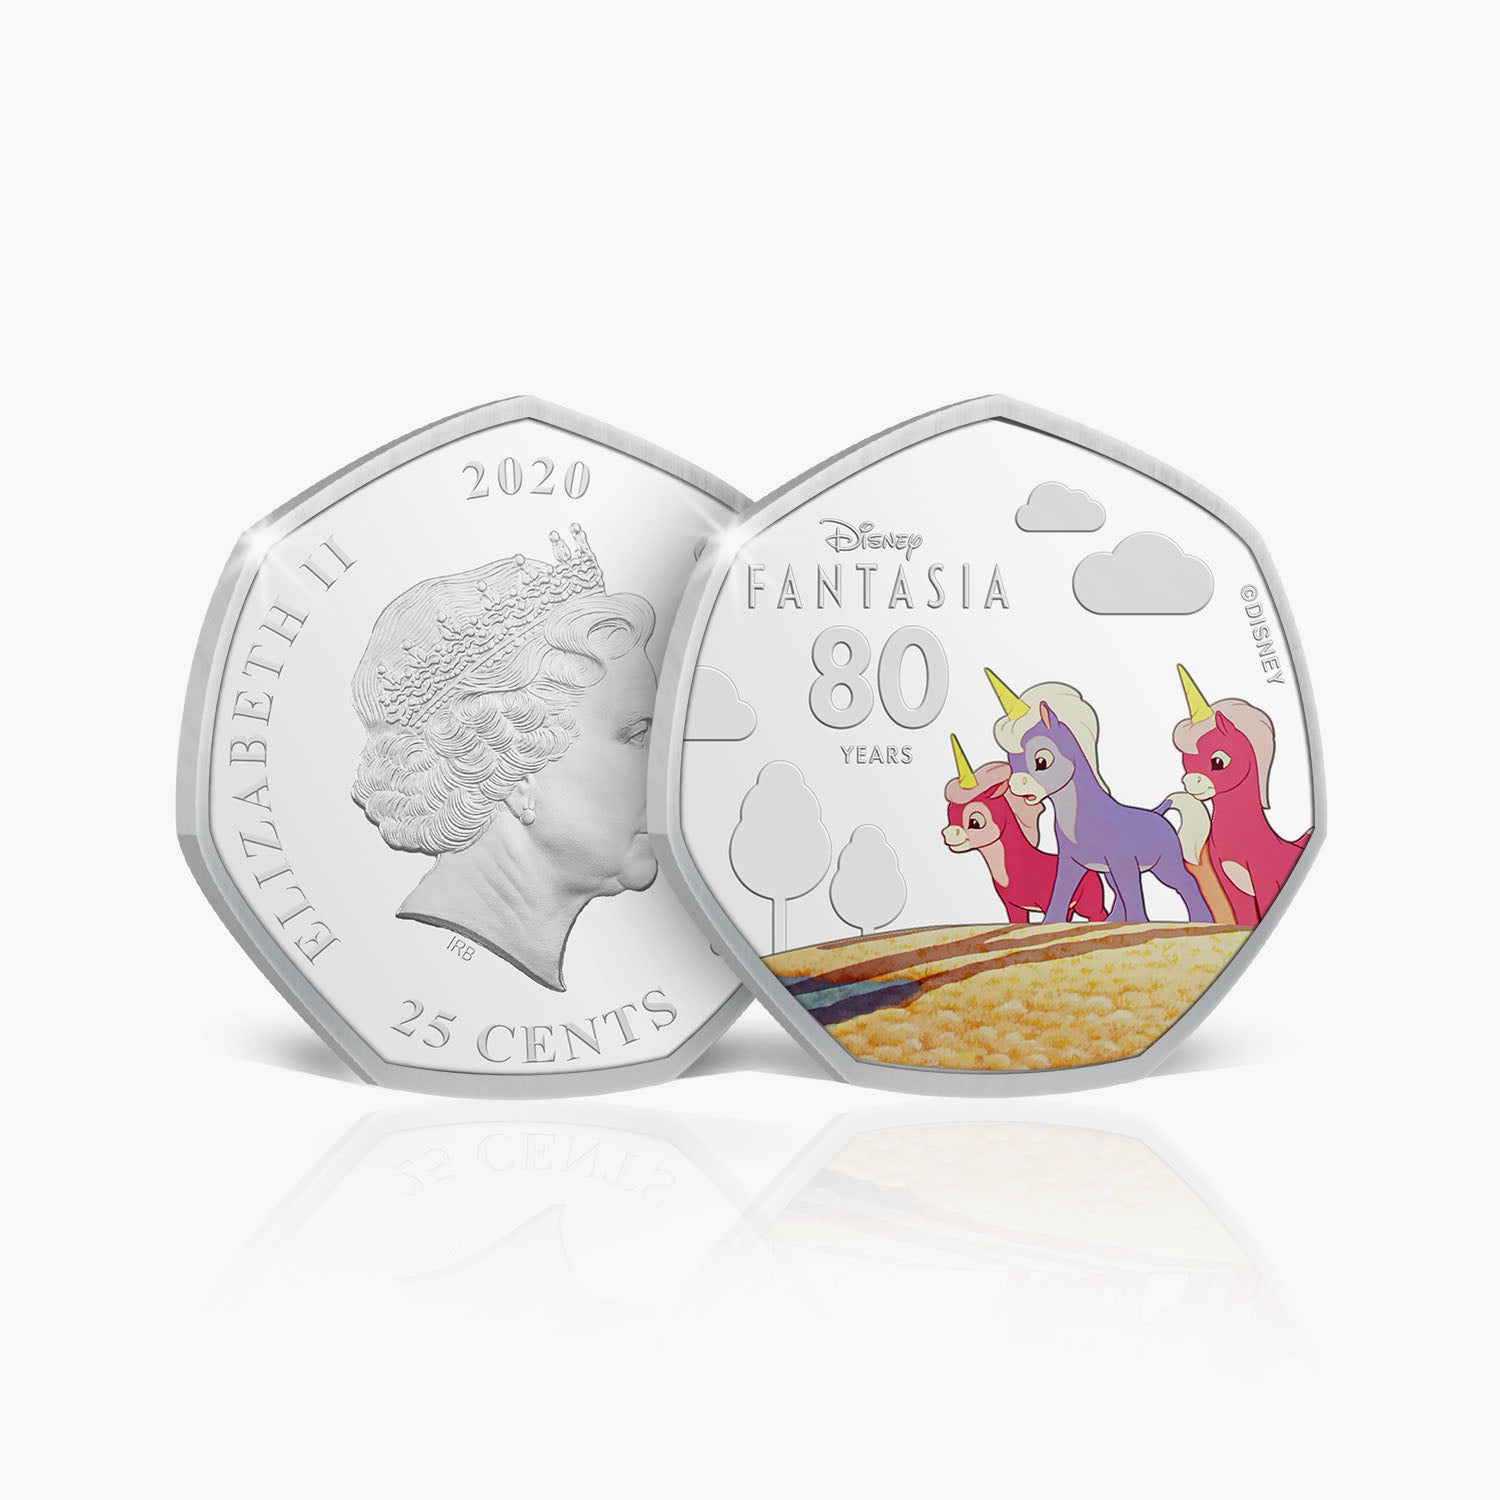 The Pastoral Symphony Silver Plated Coin